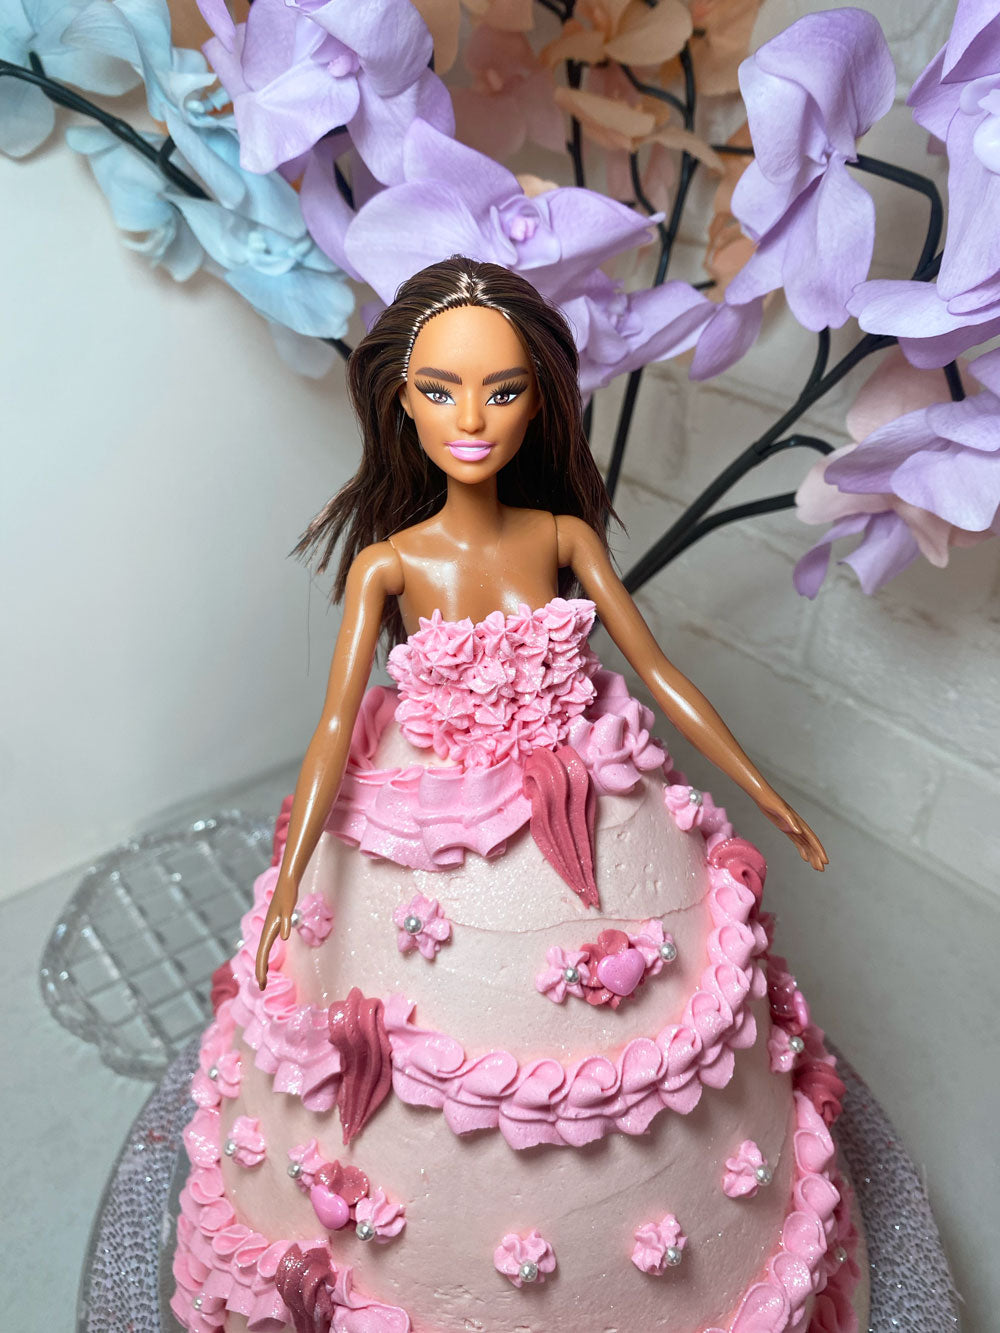 Buy Barbie Doll Cake| Online Cake Delivery - CakeBee